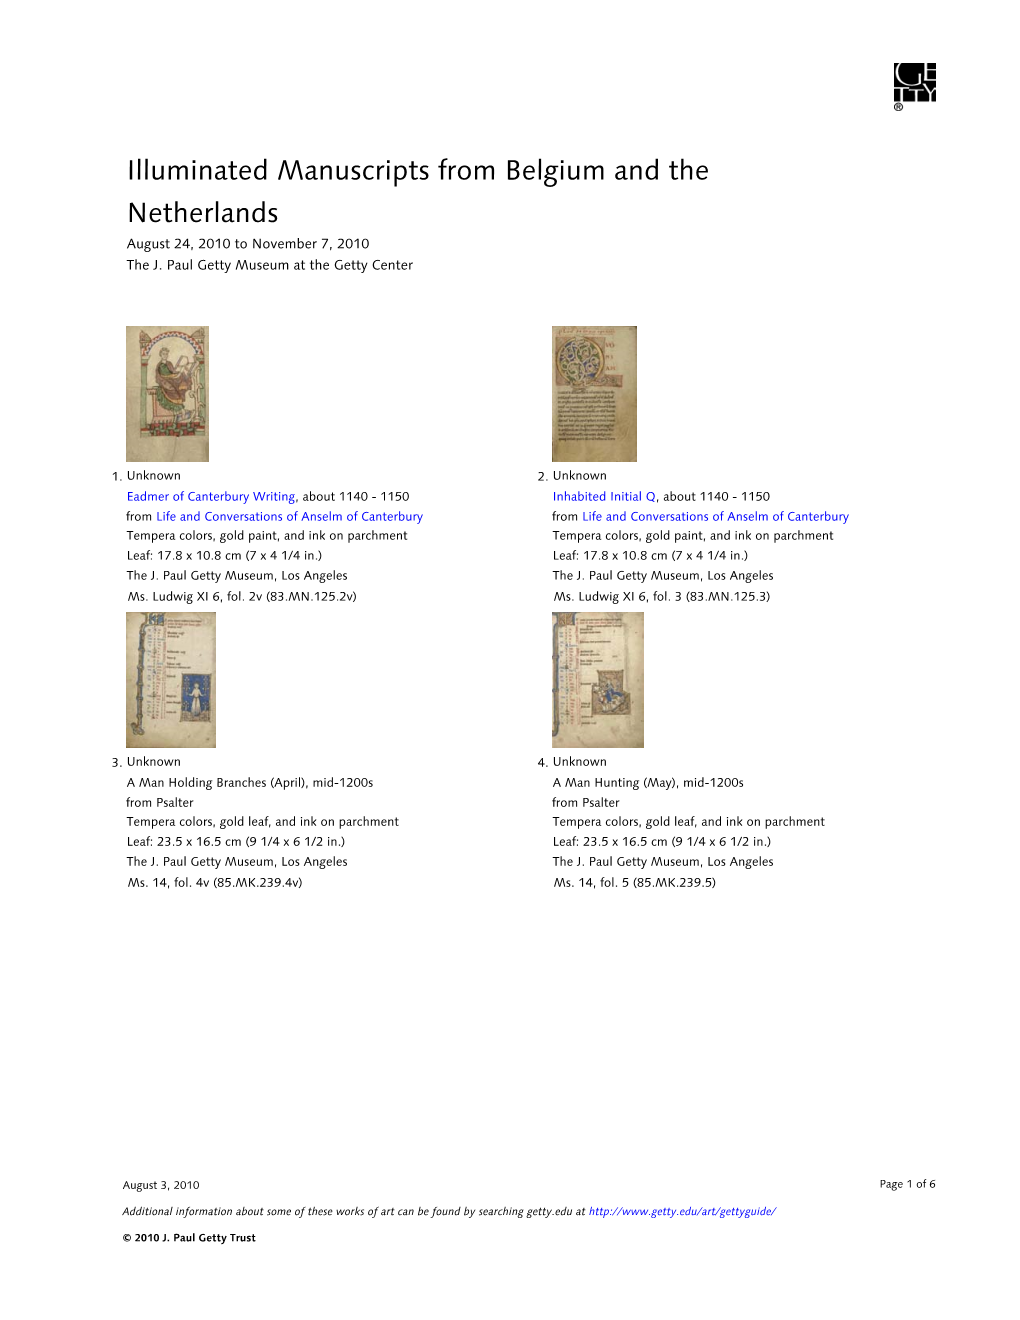 Illuminated Manuscripts from Belgium and the Netherlands August 24, 2010 to November 7, 2010 the J